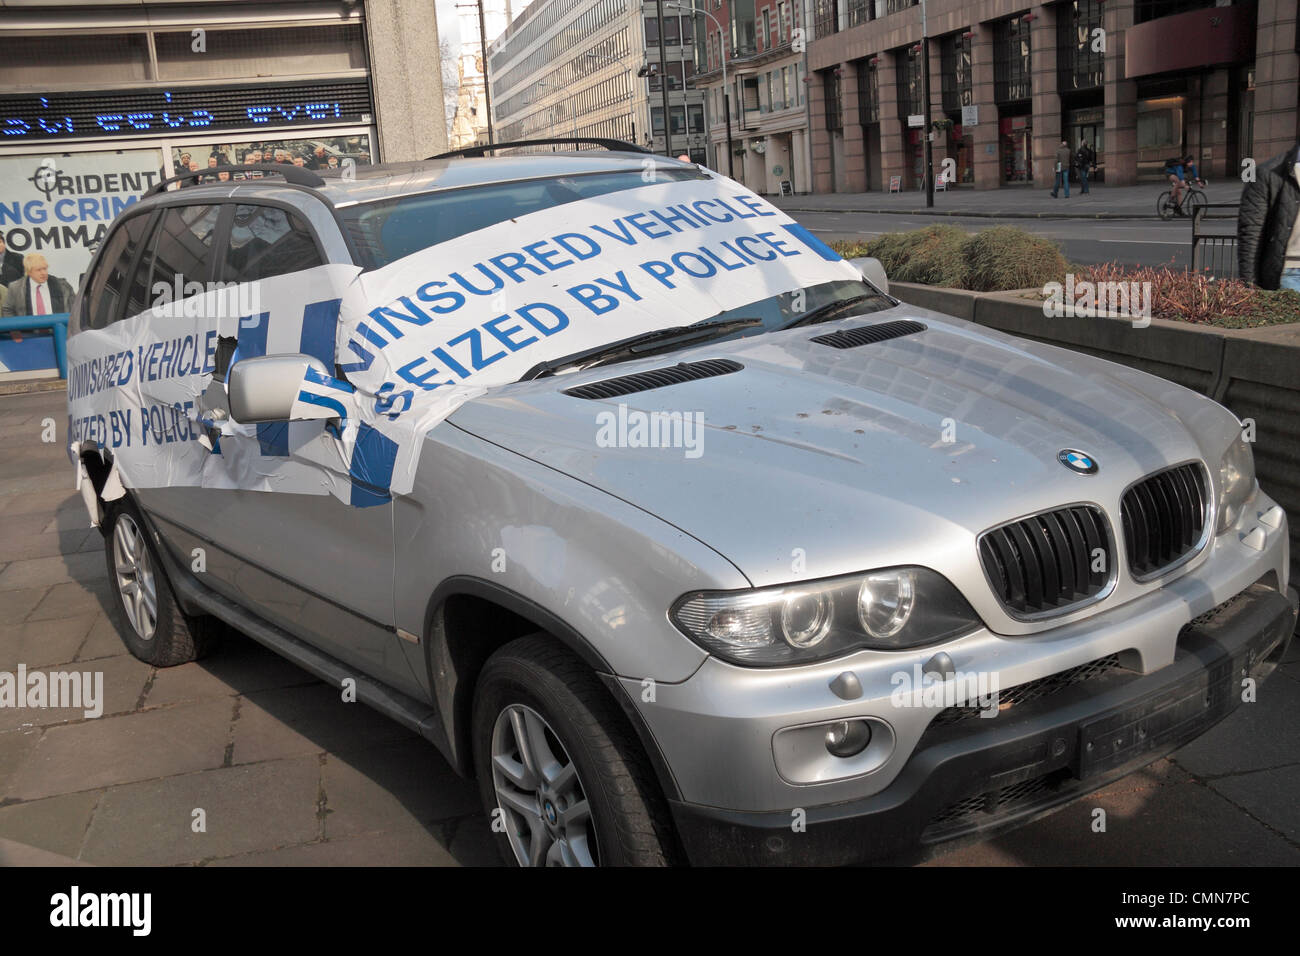 A dramatically tape-covered uninsured car seized by Police on display outside New Scotland Yard in Westminster, London, UK. Stock Photo